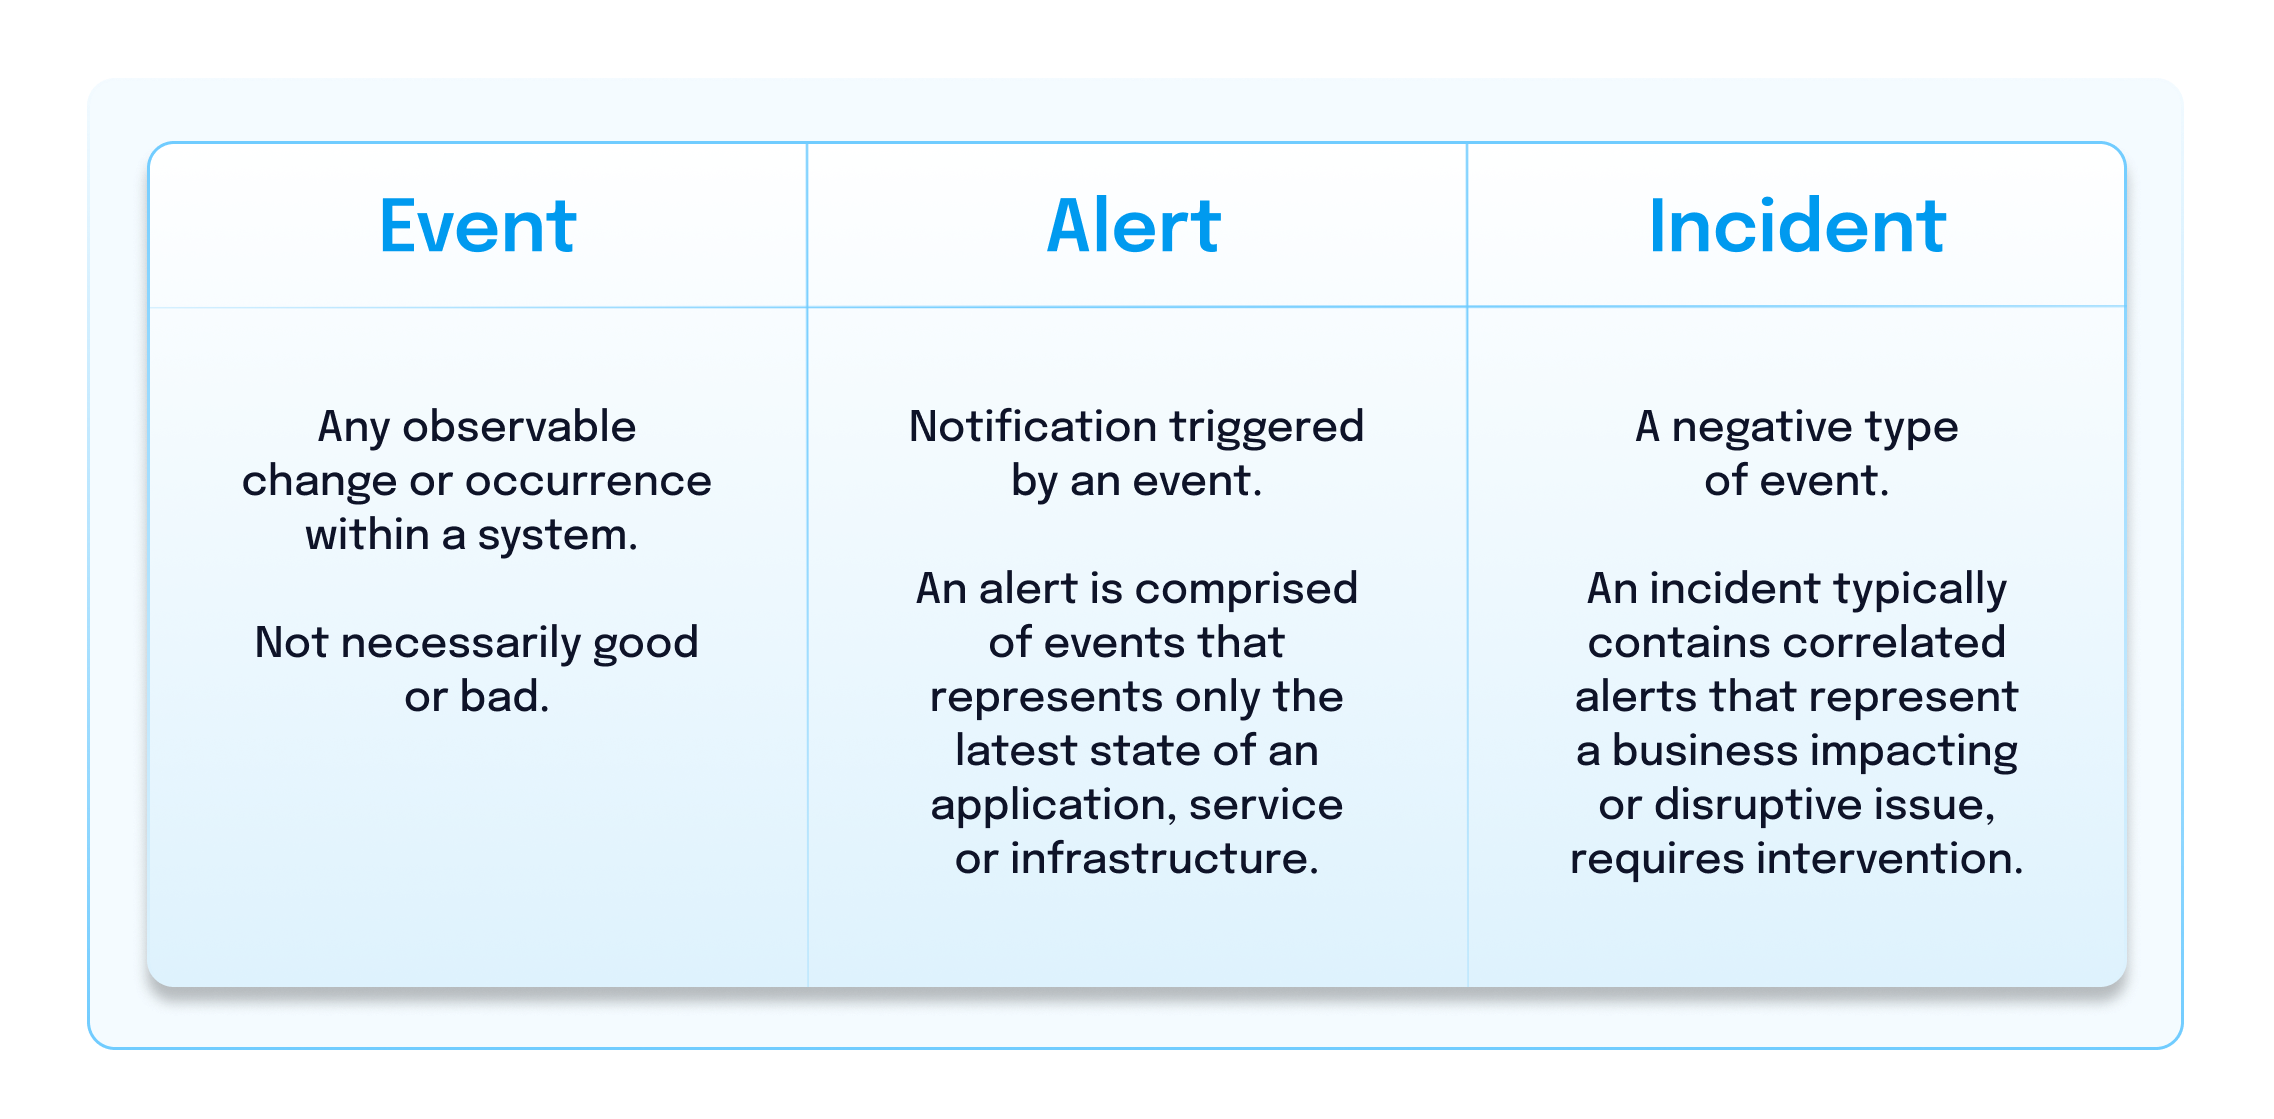 Event: Any observable change or occurrence within a system. Not necessarily good or bad.; Alert: Notification triggered by an event. An alert is comprised of events that represents only the latest state of an application, service or infrastructure.; Incident: A negative type of event. An incident typically contains correlated alerts that represent a business impacting or disruptive issue, requires intervention.